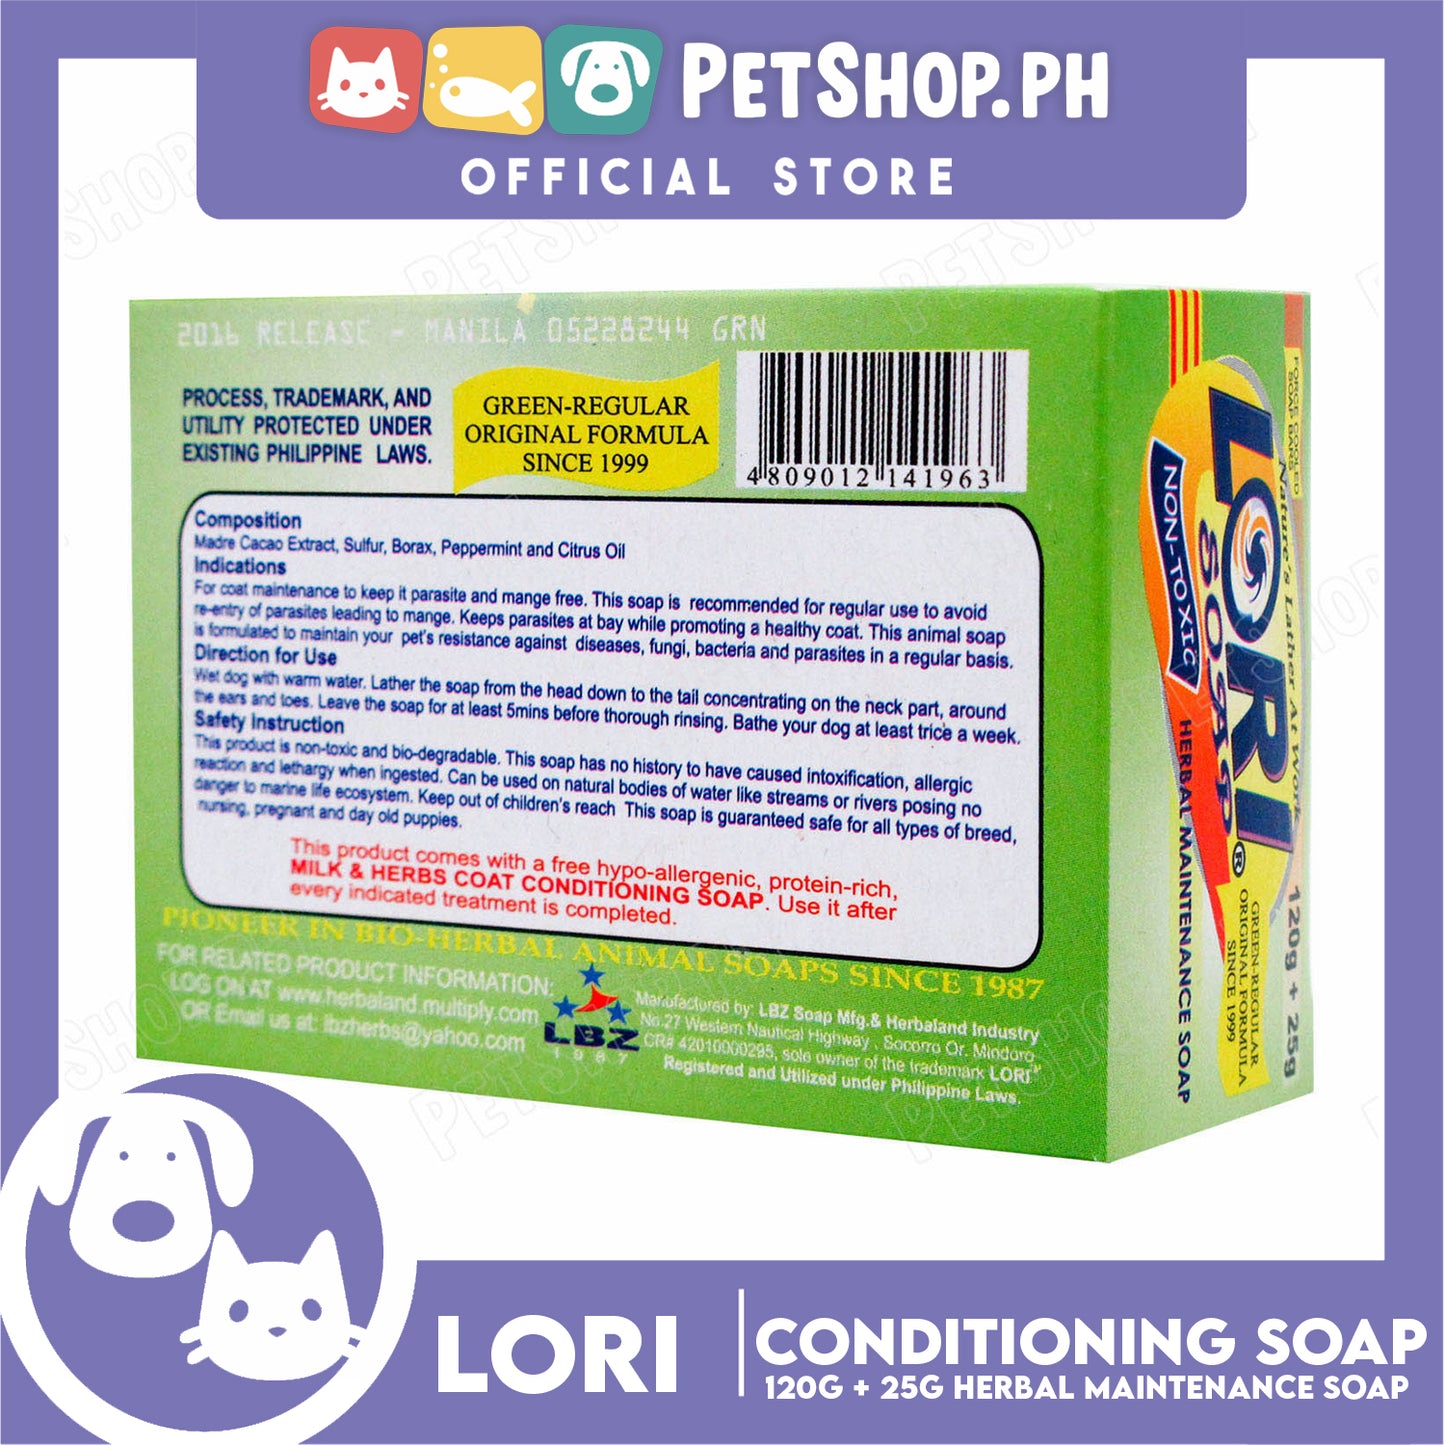 Nature's Lather At Work Lori Soap Non-Toxic 120g (Herbal Maintanance Soap) Dog Soap, Dog Grooming